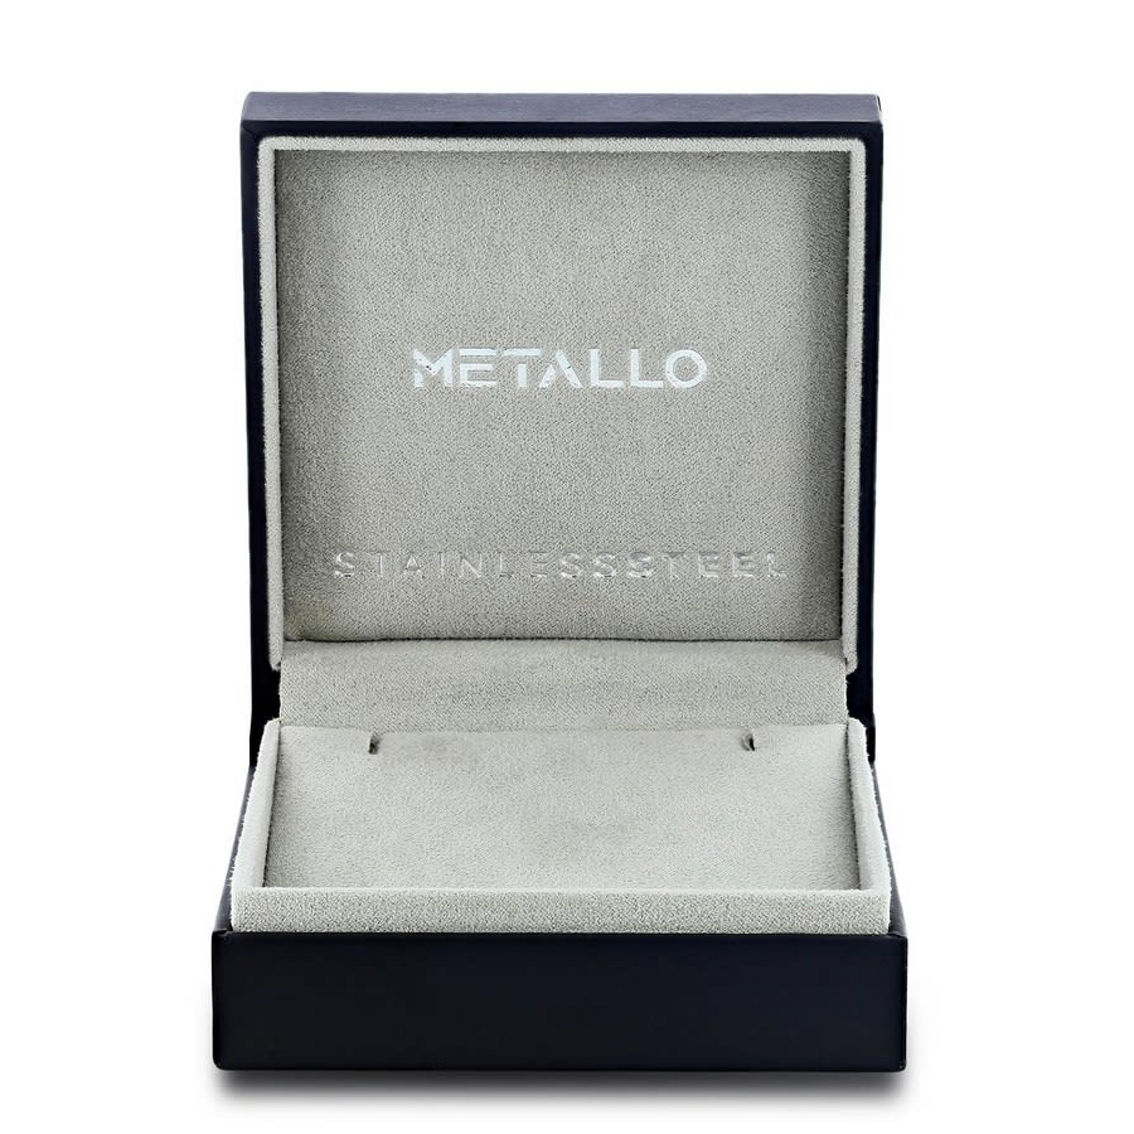 Metallo Stainless Steel Polished CZ Cross Necklace - Image 2 of 3